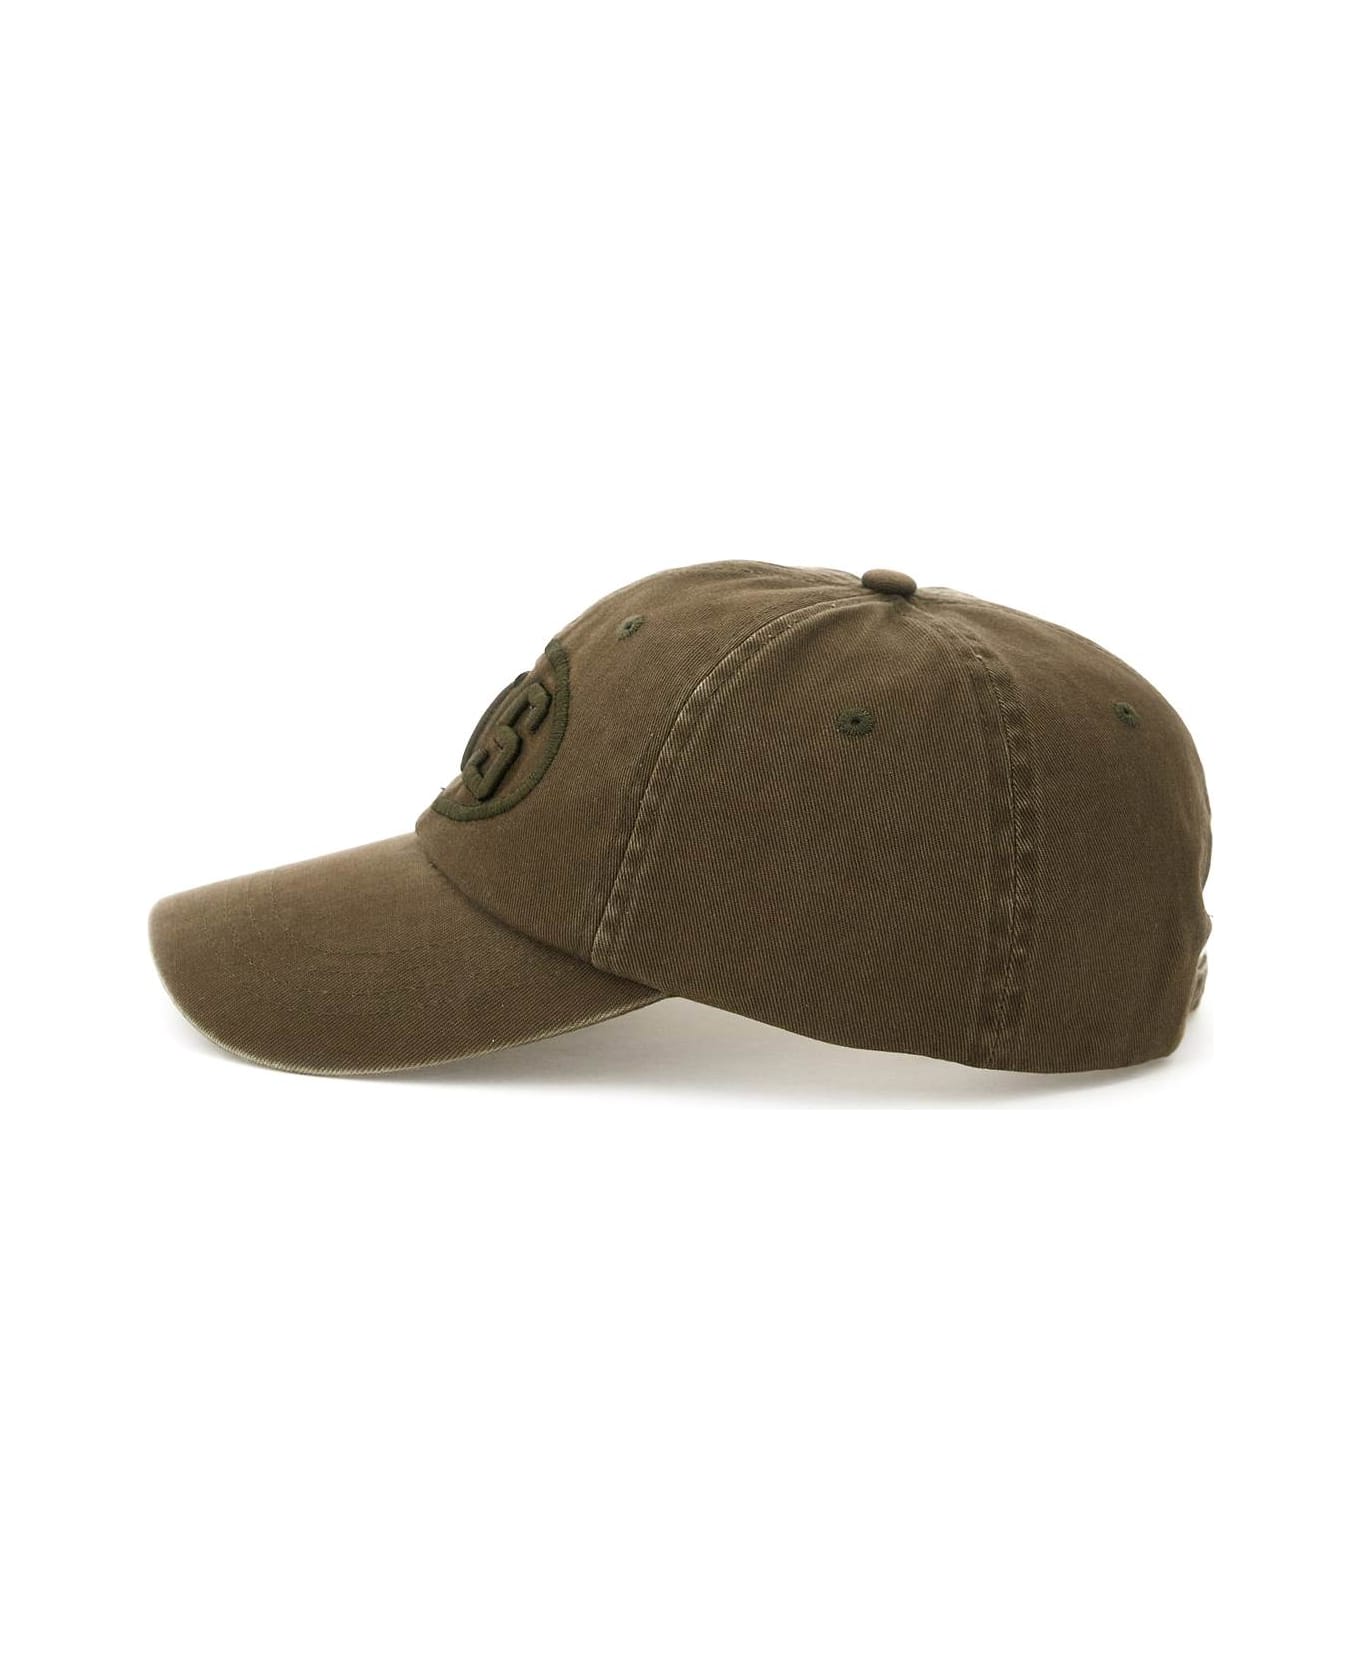 Parajumpers Baseball Cap With Embroidery - SURPLUS GREEN (Green)